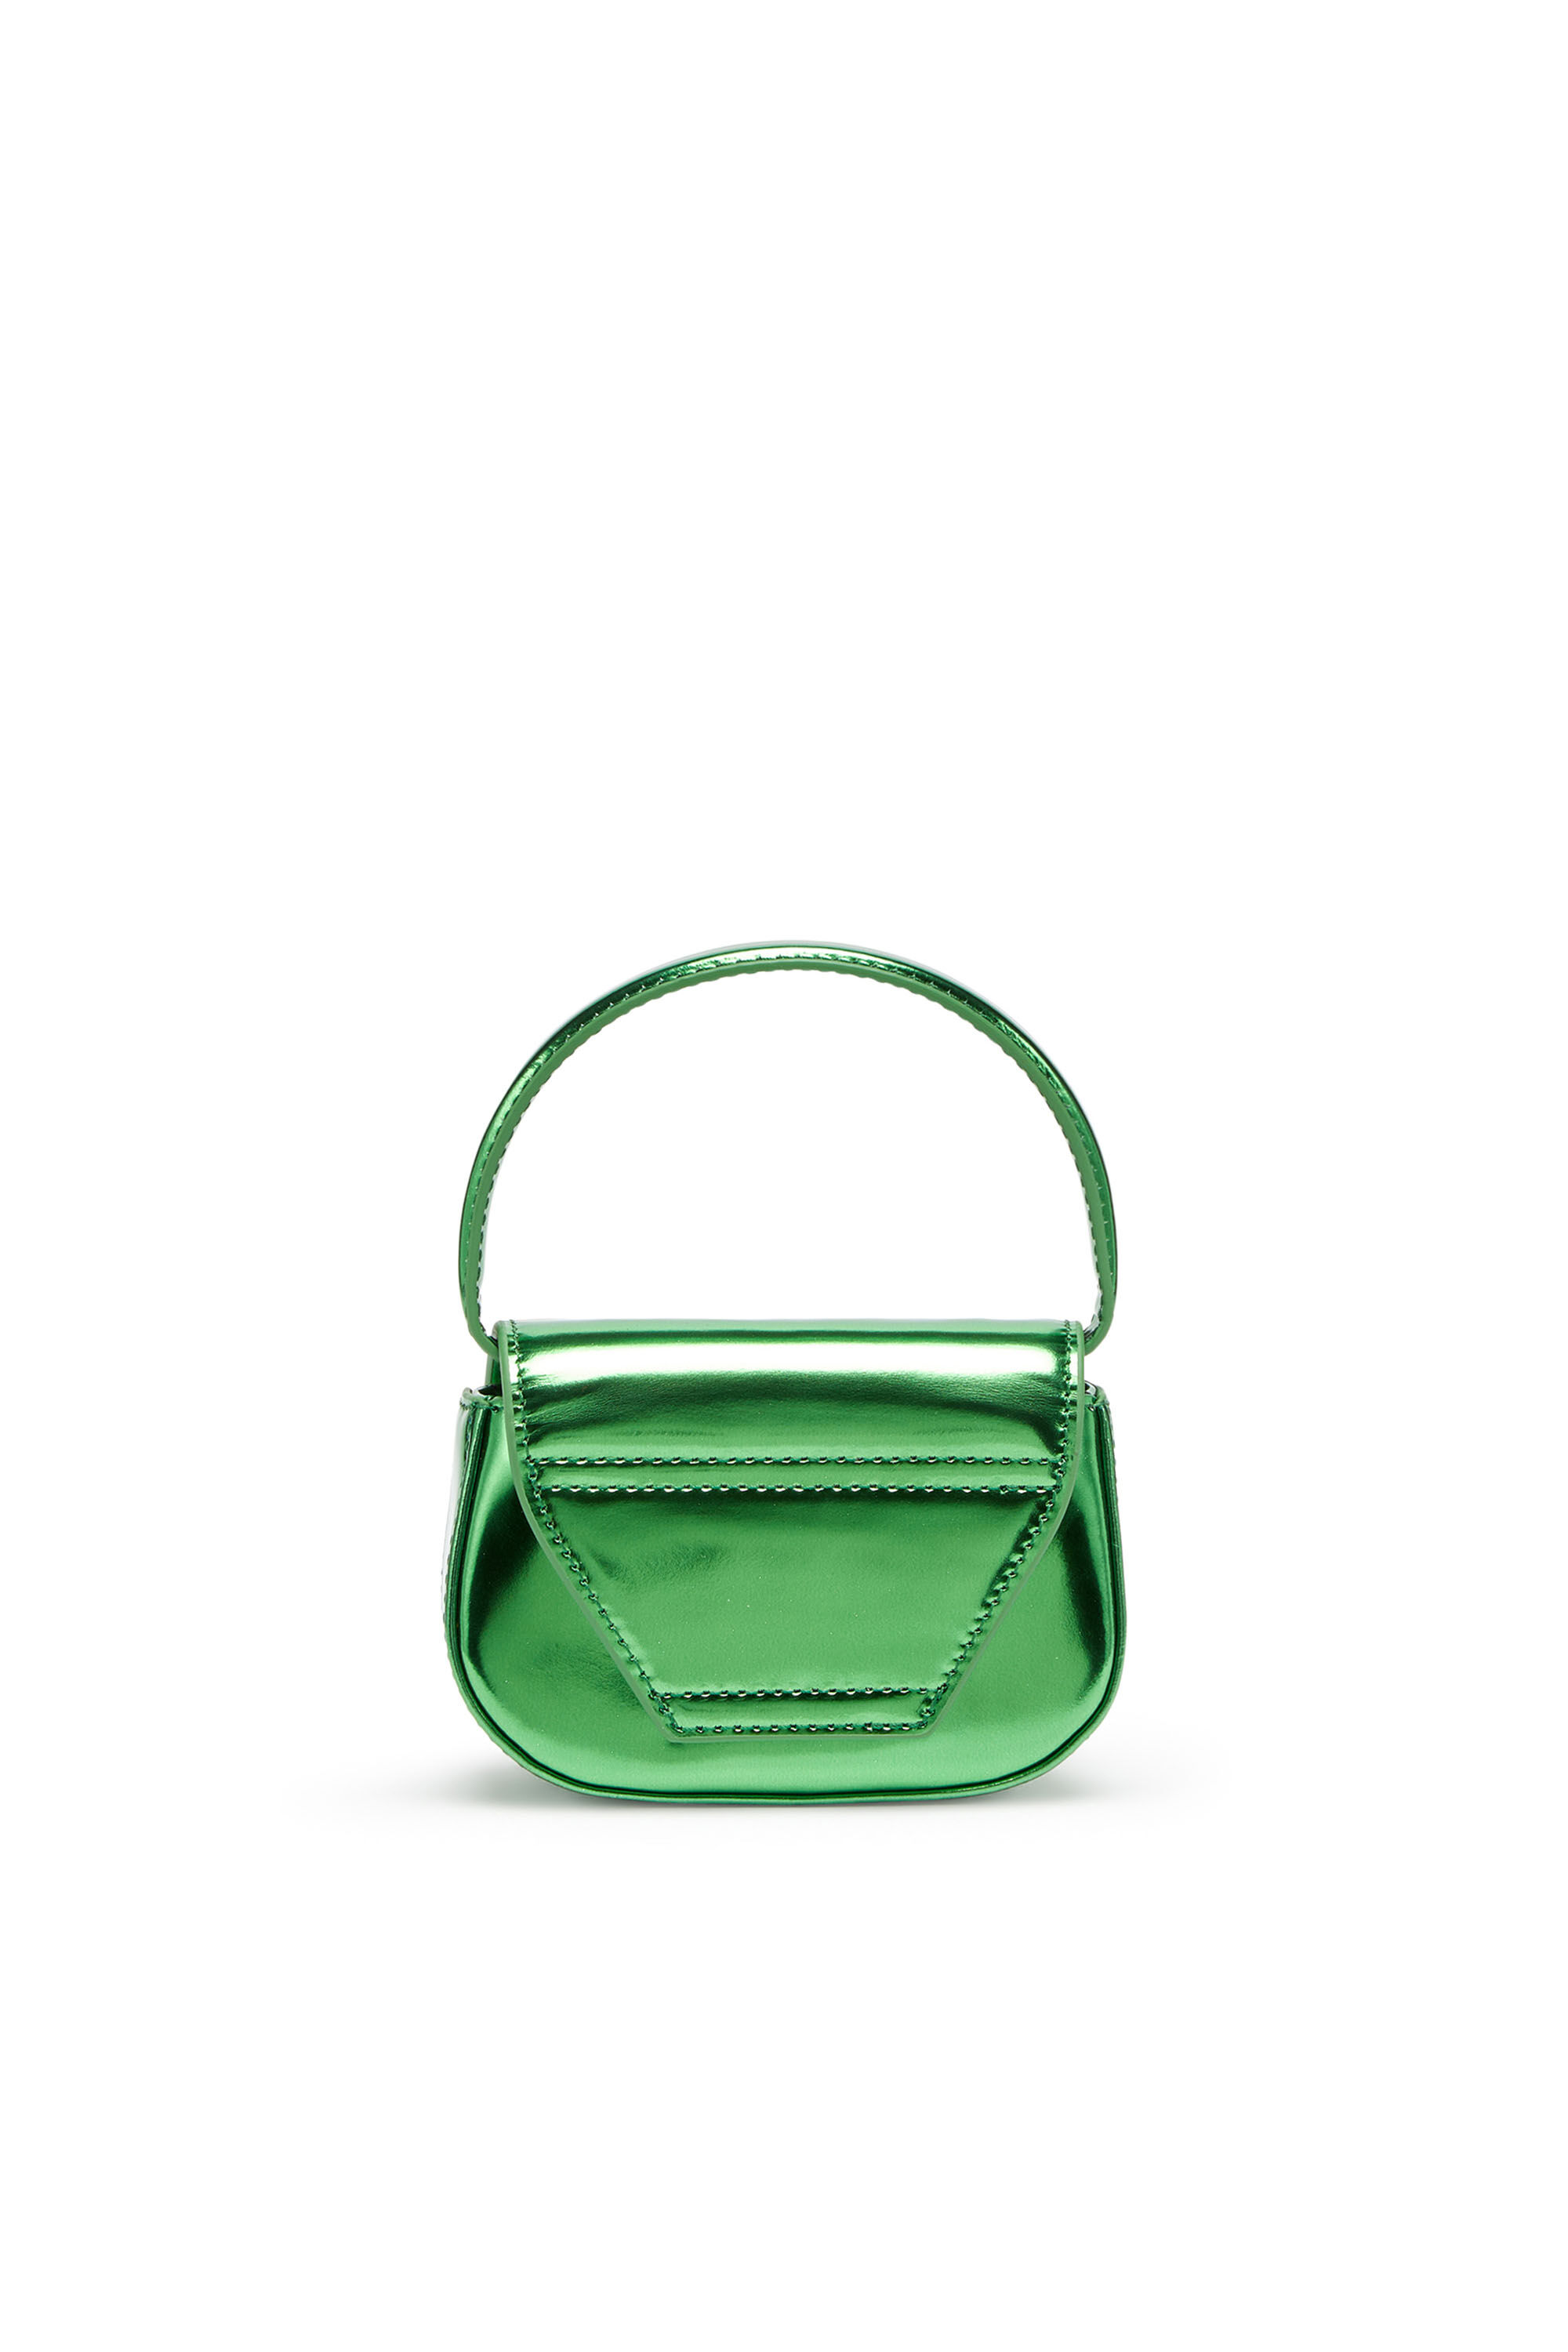 Diesel - 1DR-XS-S, Woman 1DR-XS-S-Iconic mini bag in mirrored leather in Green - Image 3